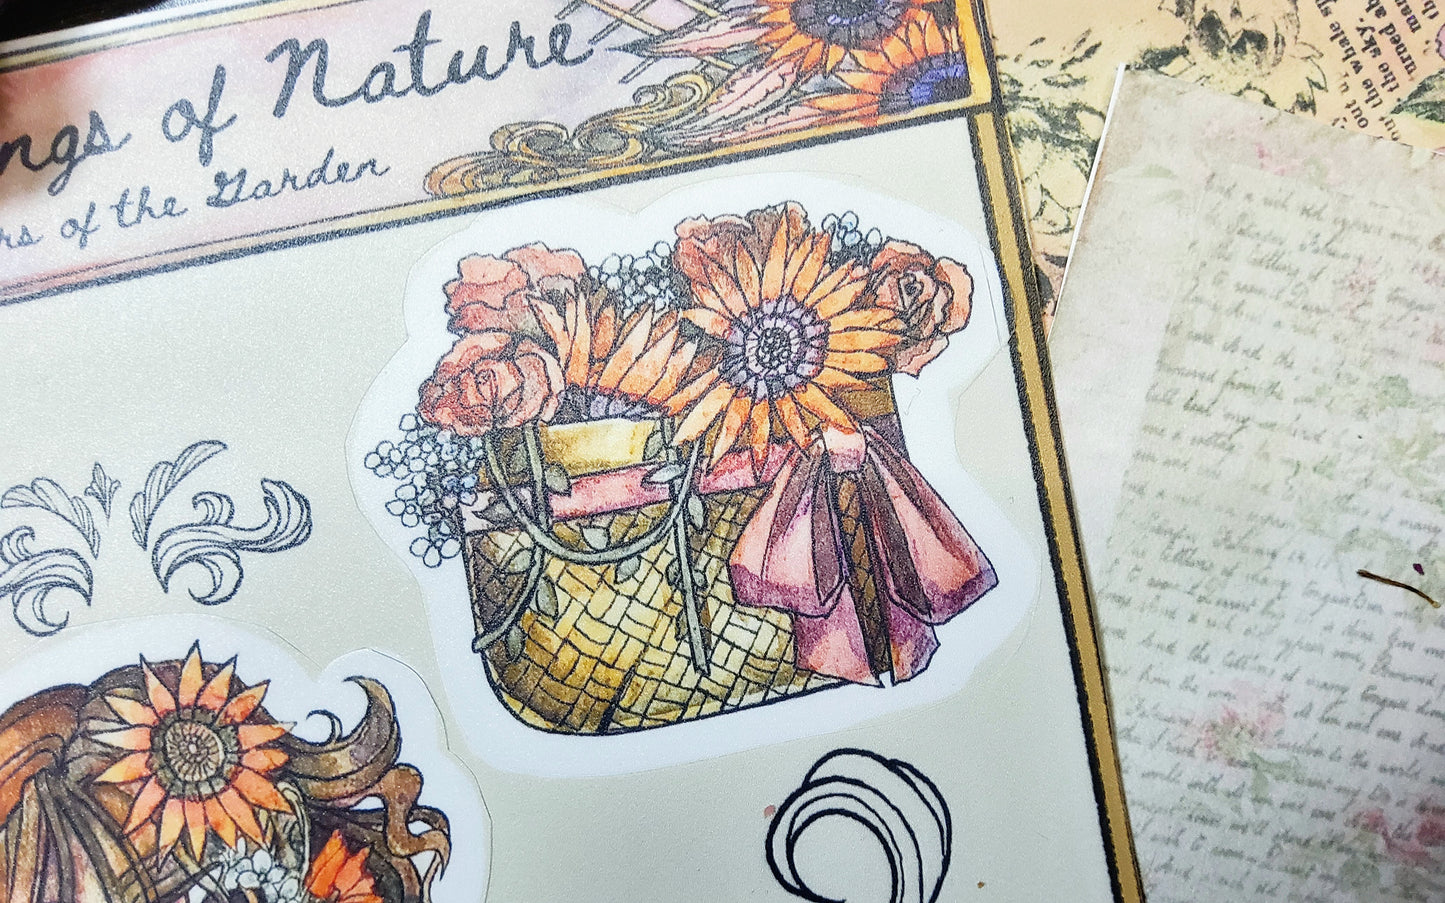 The Things of Nature: Dwellers of the Garden Sticker Sheet #1